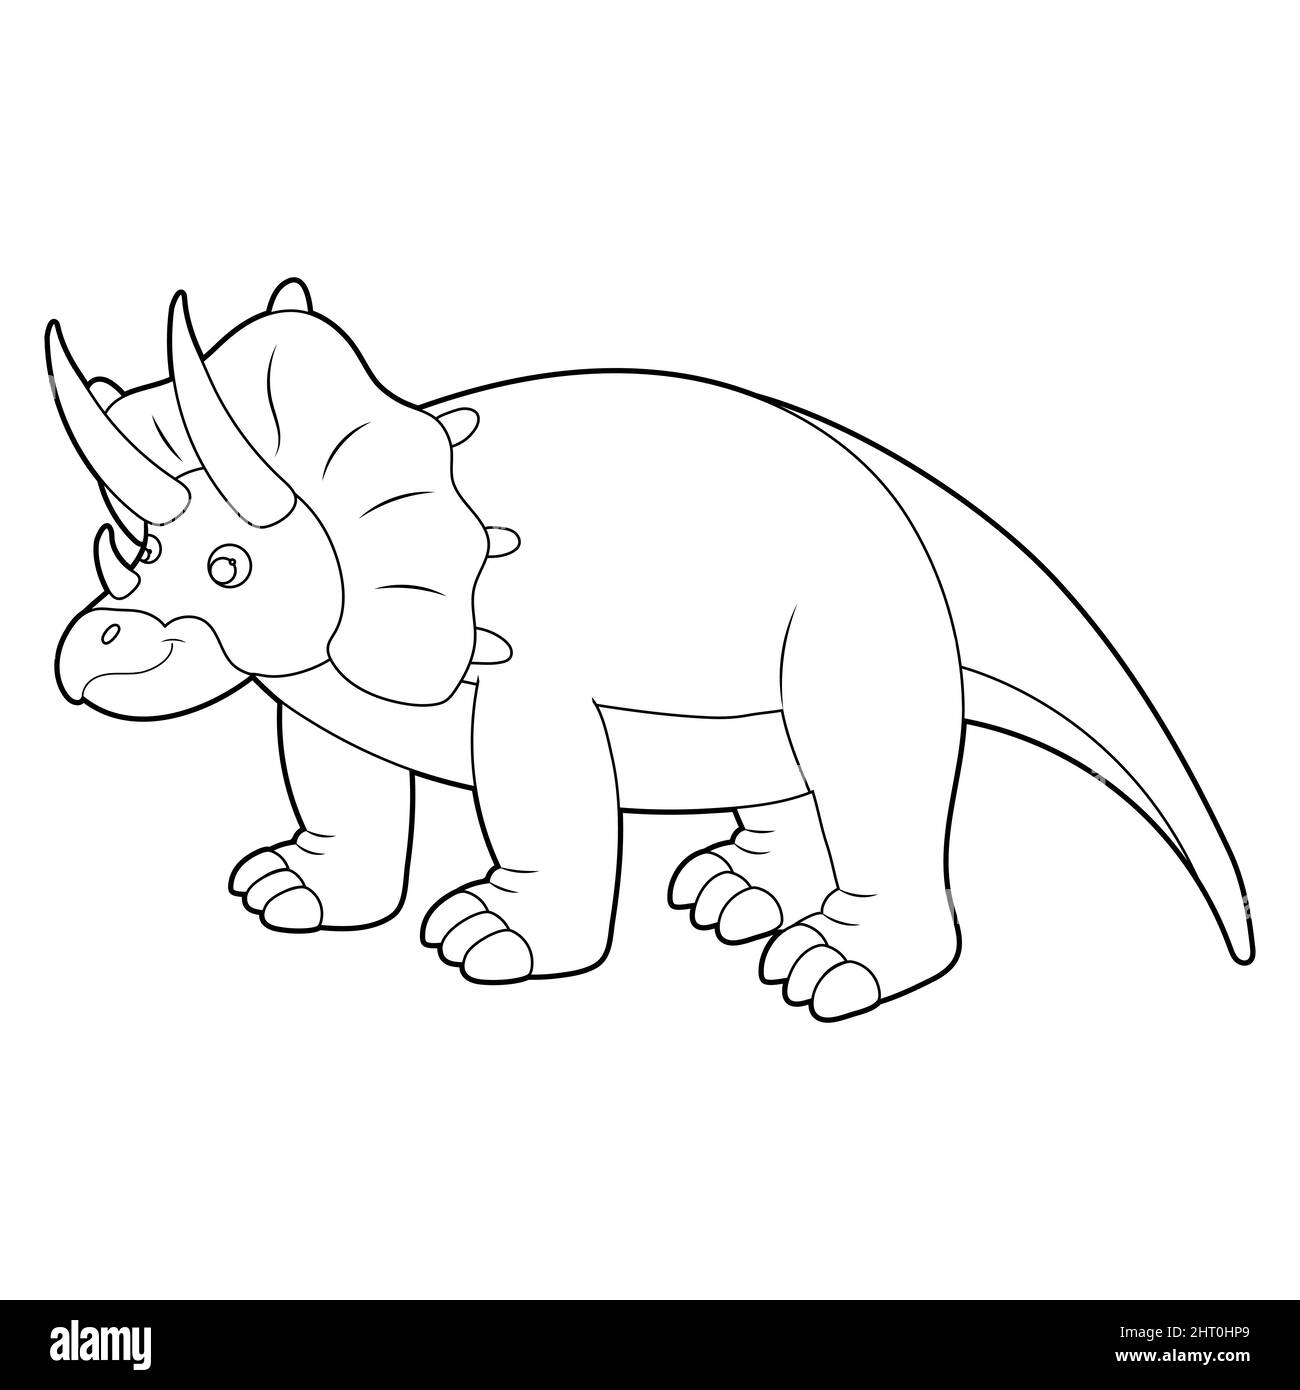 Coloring book for kids, triceratops dinosaur. Vector isolated on a white background Stock Vector